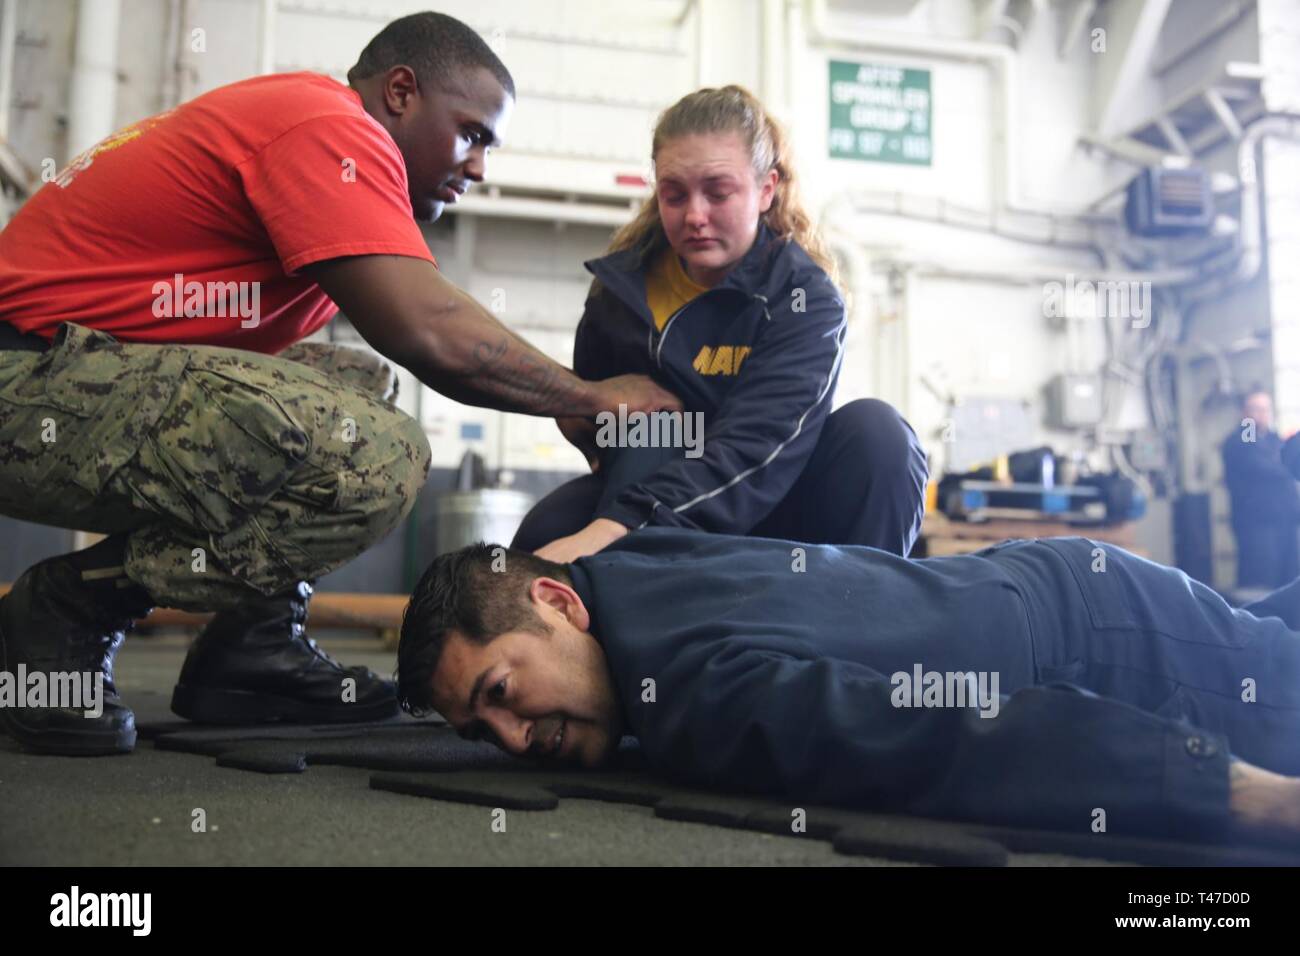 OCEAN (Mar. 15, 2019) Master-at-Arms 2nd Class Trayvond Strickland instructs Seaman Georgia Knight, as she performs a mock take down of Master-at-Arms 2nd Class John Roldan, during an oleoresin capsicum (OC) course aboard the multipurpose amphibious assault ship USS Bataan (LHD 5) The ship is underway conducting sea trials. Stock Photo